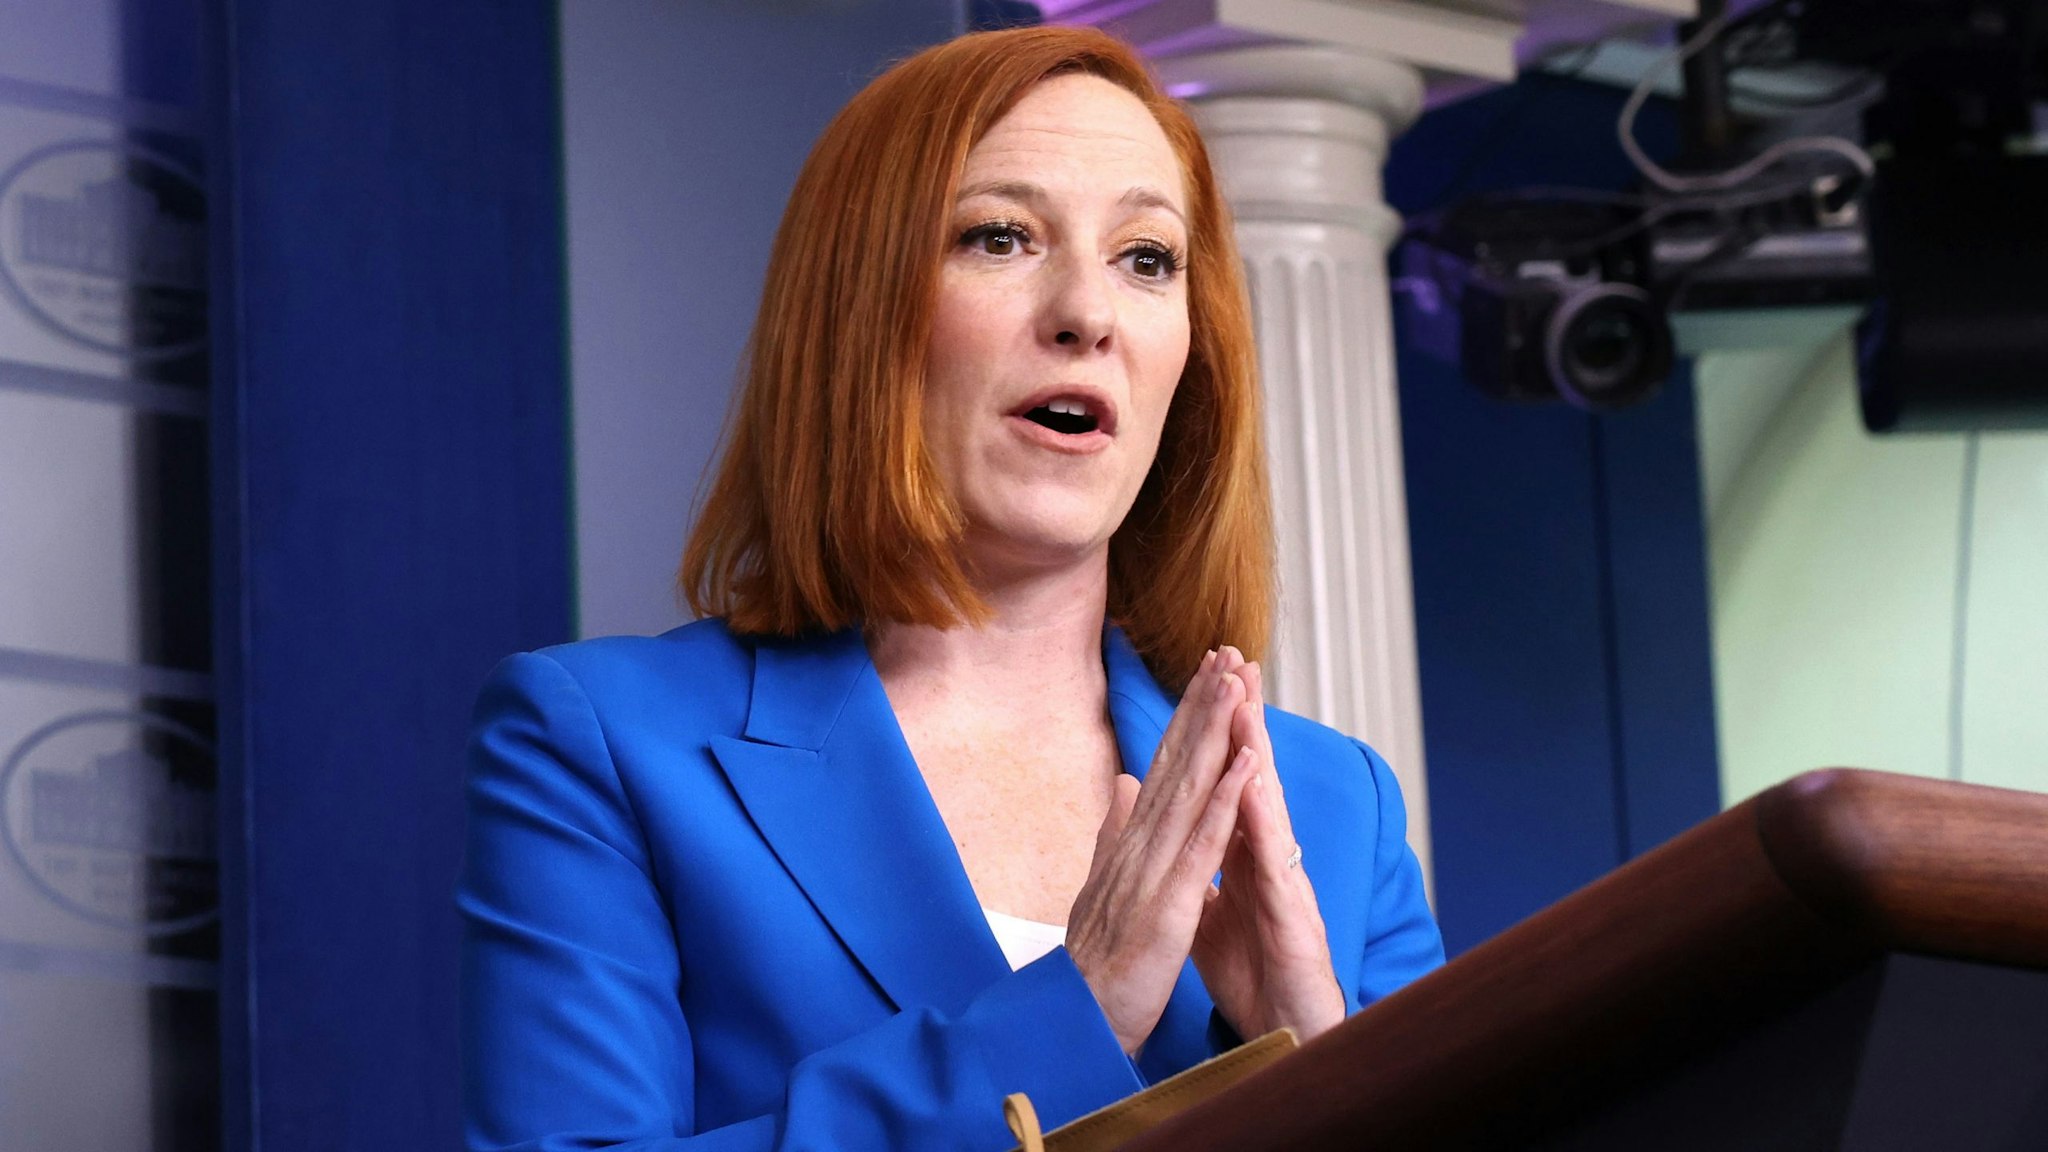 WASHINGTON, DC - MAY 17: White House Press Secretary Jen Psaki speaks at a daily press briefing at the James Brady Press Briefing Room of the White House on May 17, 2021 in Washington, DC. Psaki spoke on the United States' involvement in the current Israel and Palestine conflict.